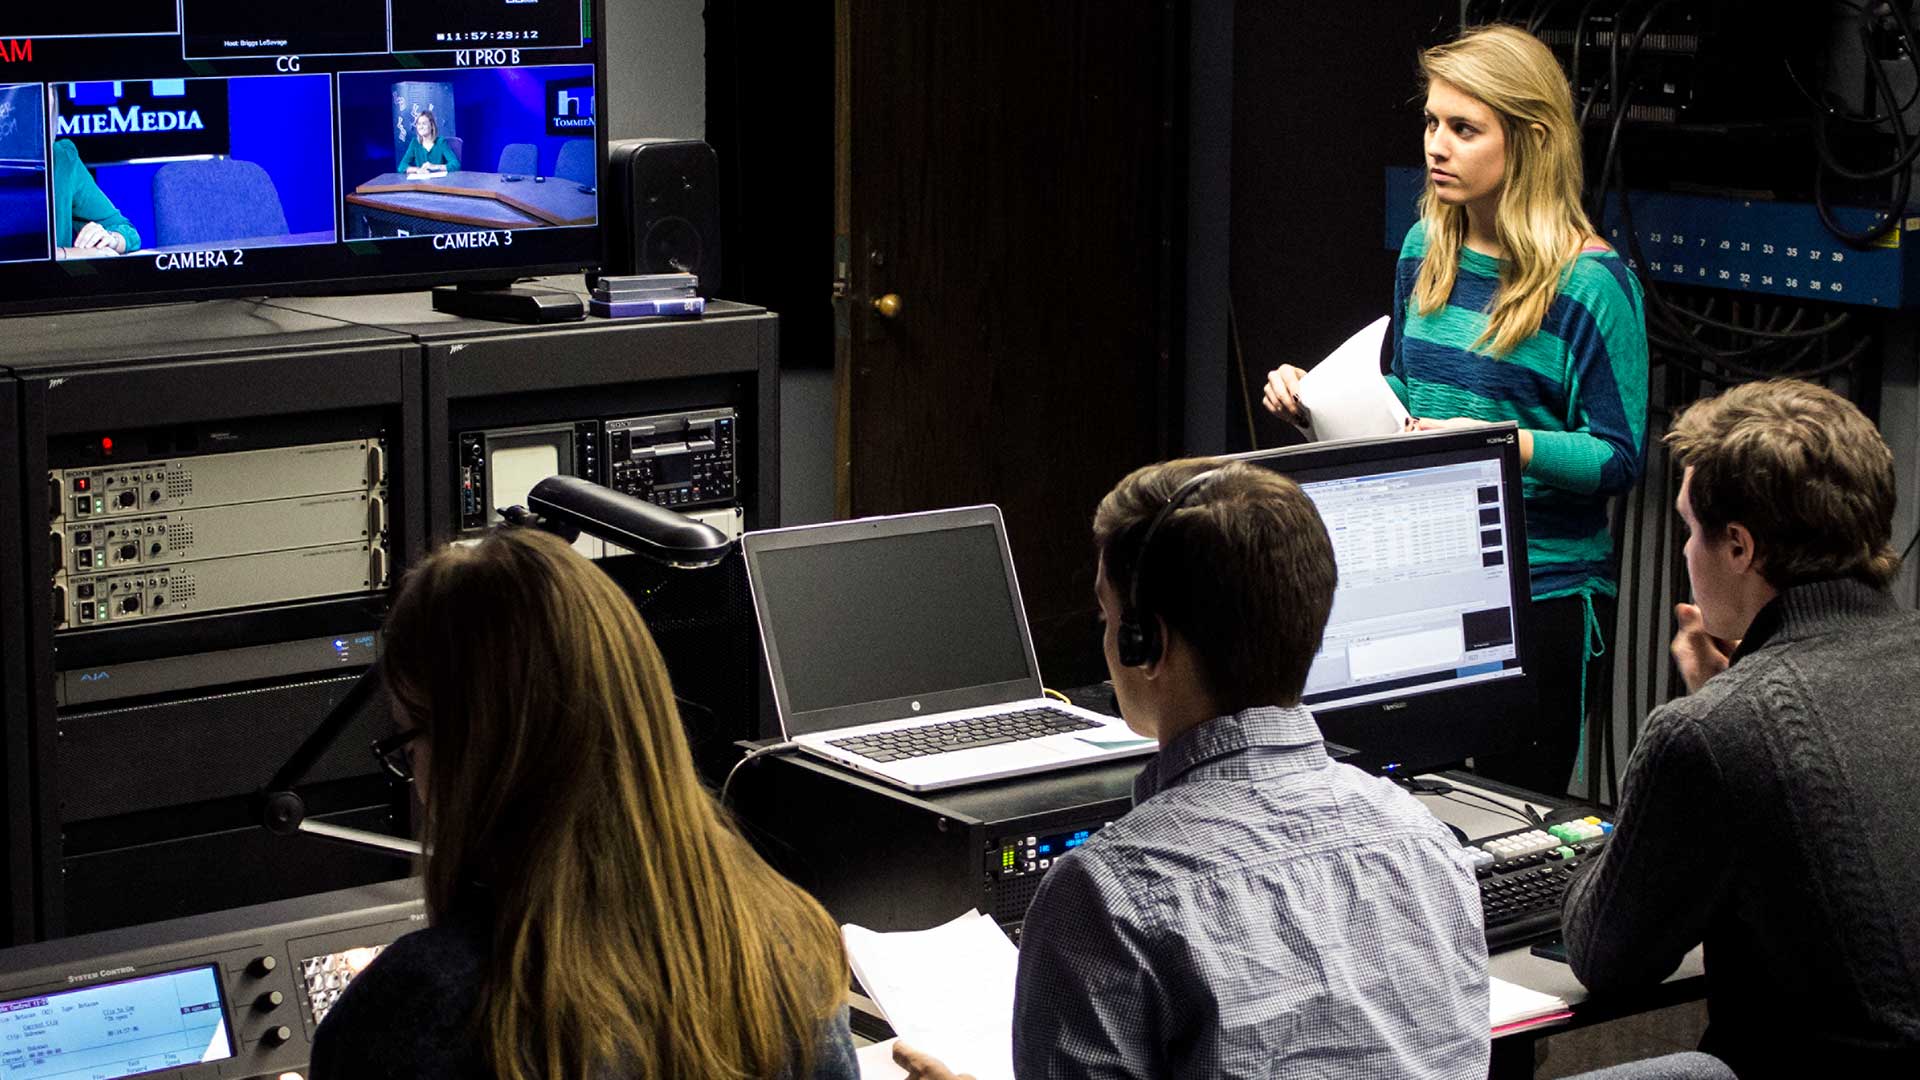 TommieMedia students working in a production studio.